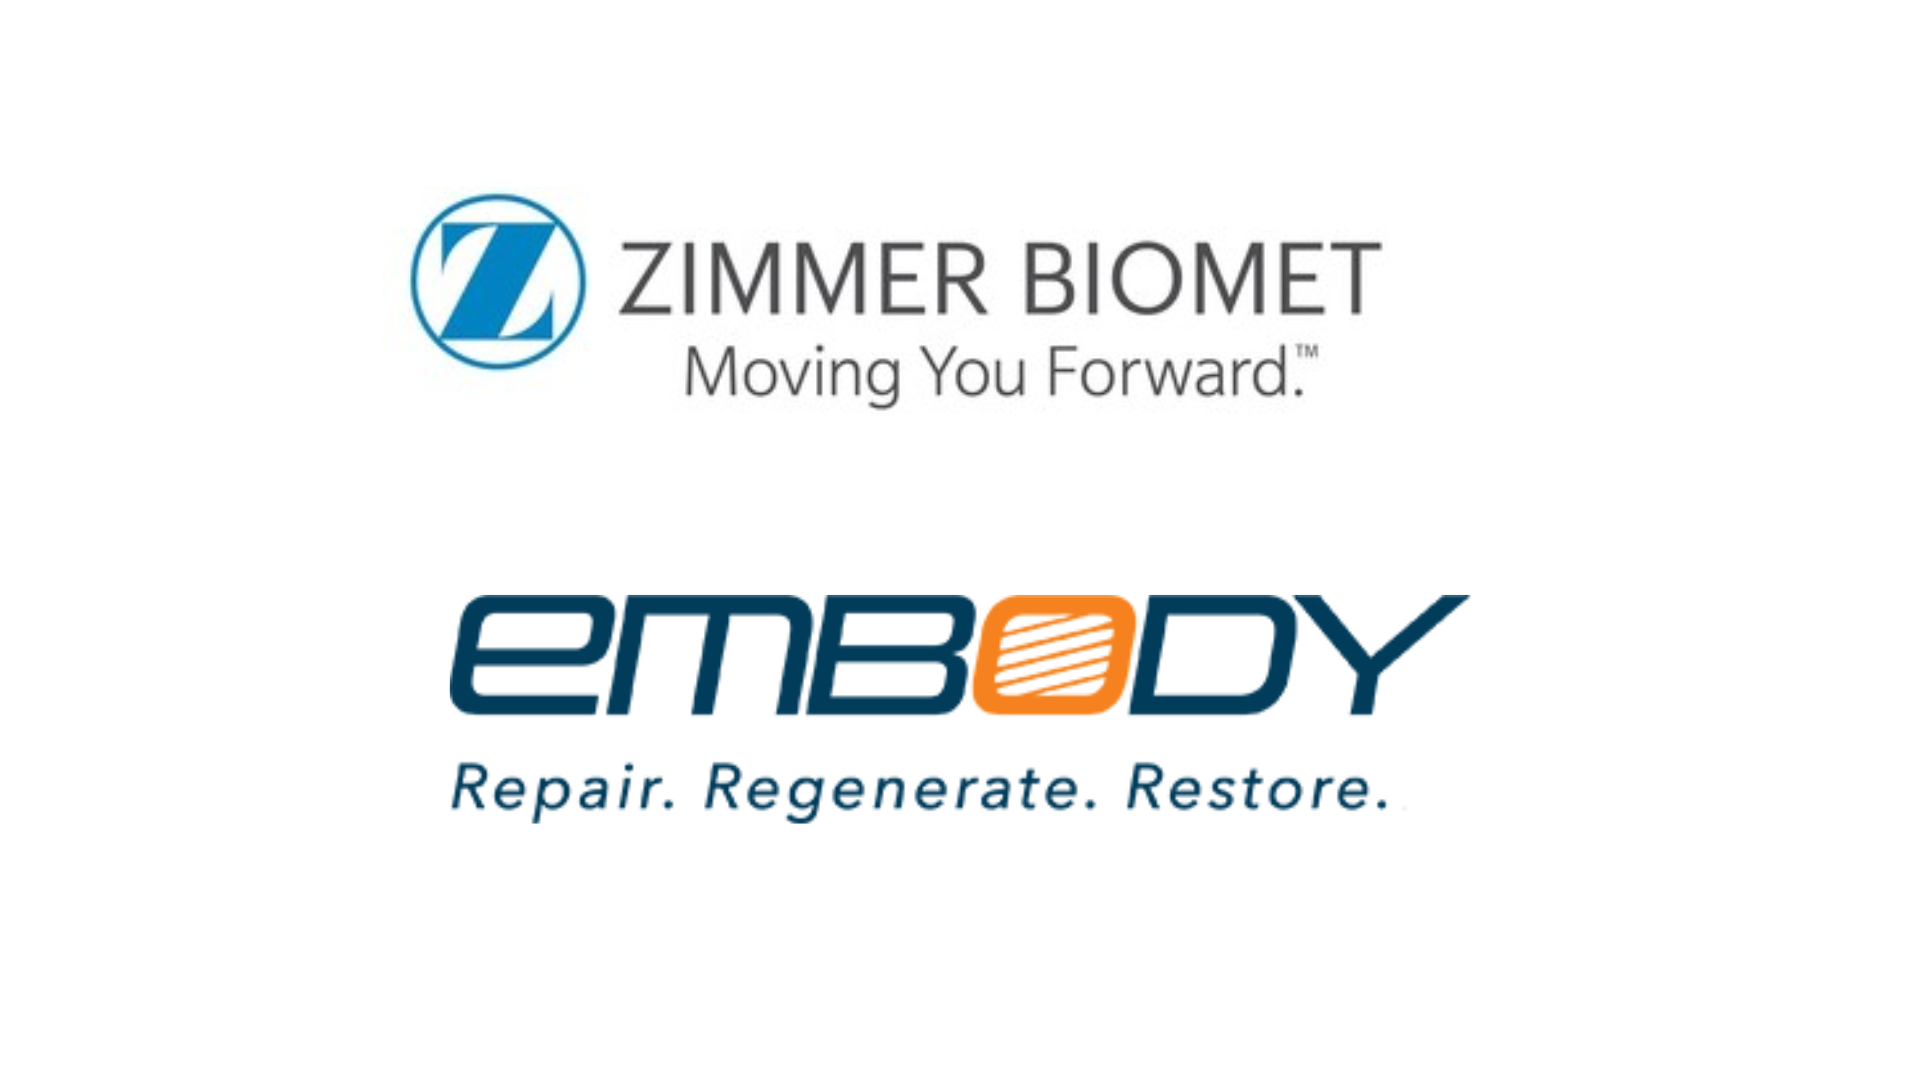 Zimmer Biomet has reached agreement to acquire Embody. Both are in medical applications of 3D printing/additive manufacturing.